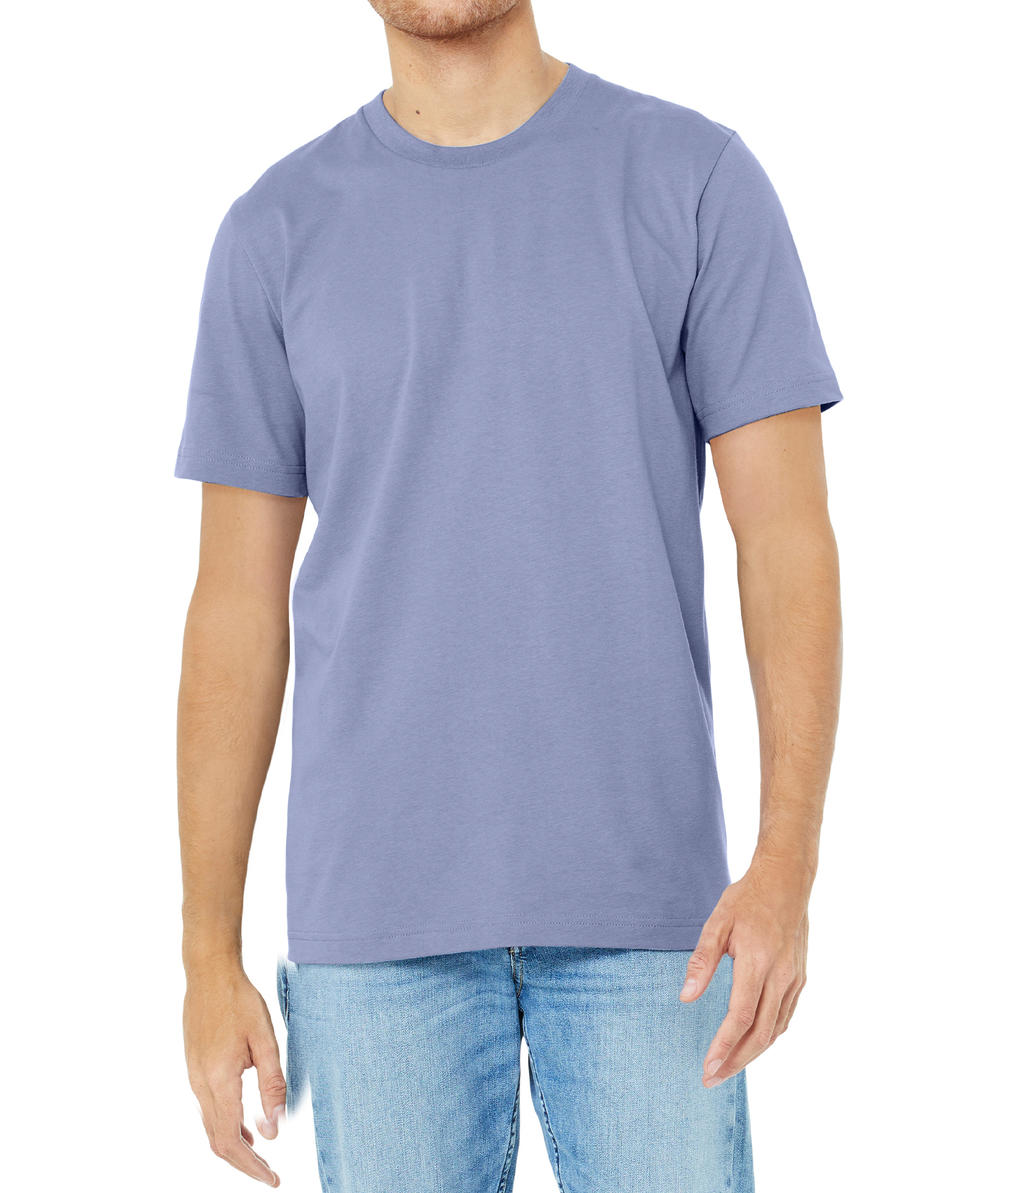  Unisex Jersey Short Sleeve Tee in Farbe Lavender Blue